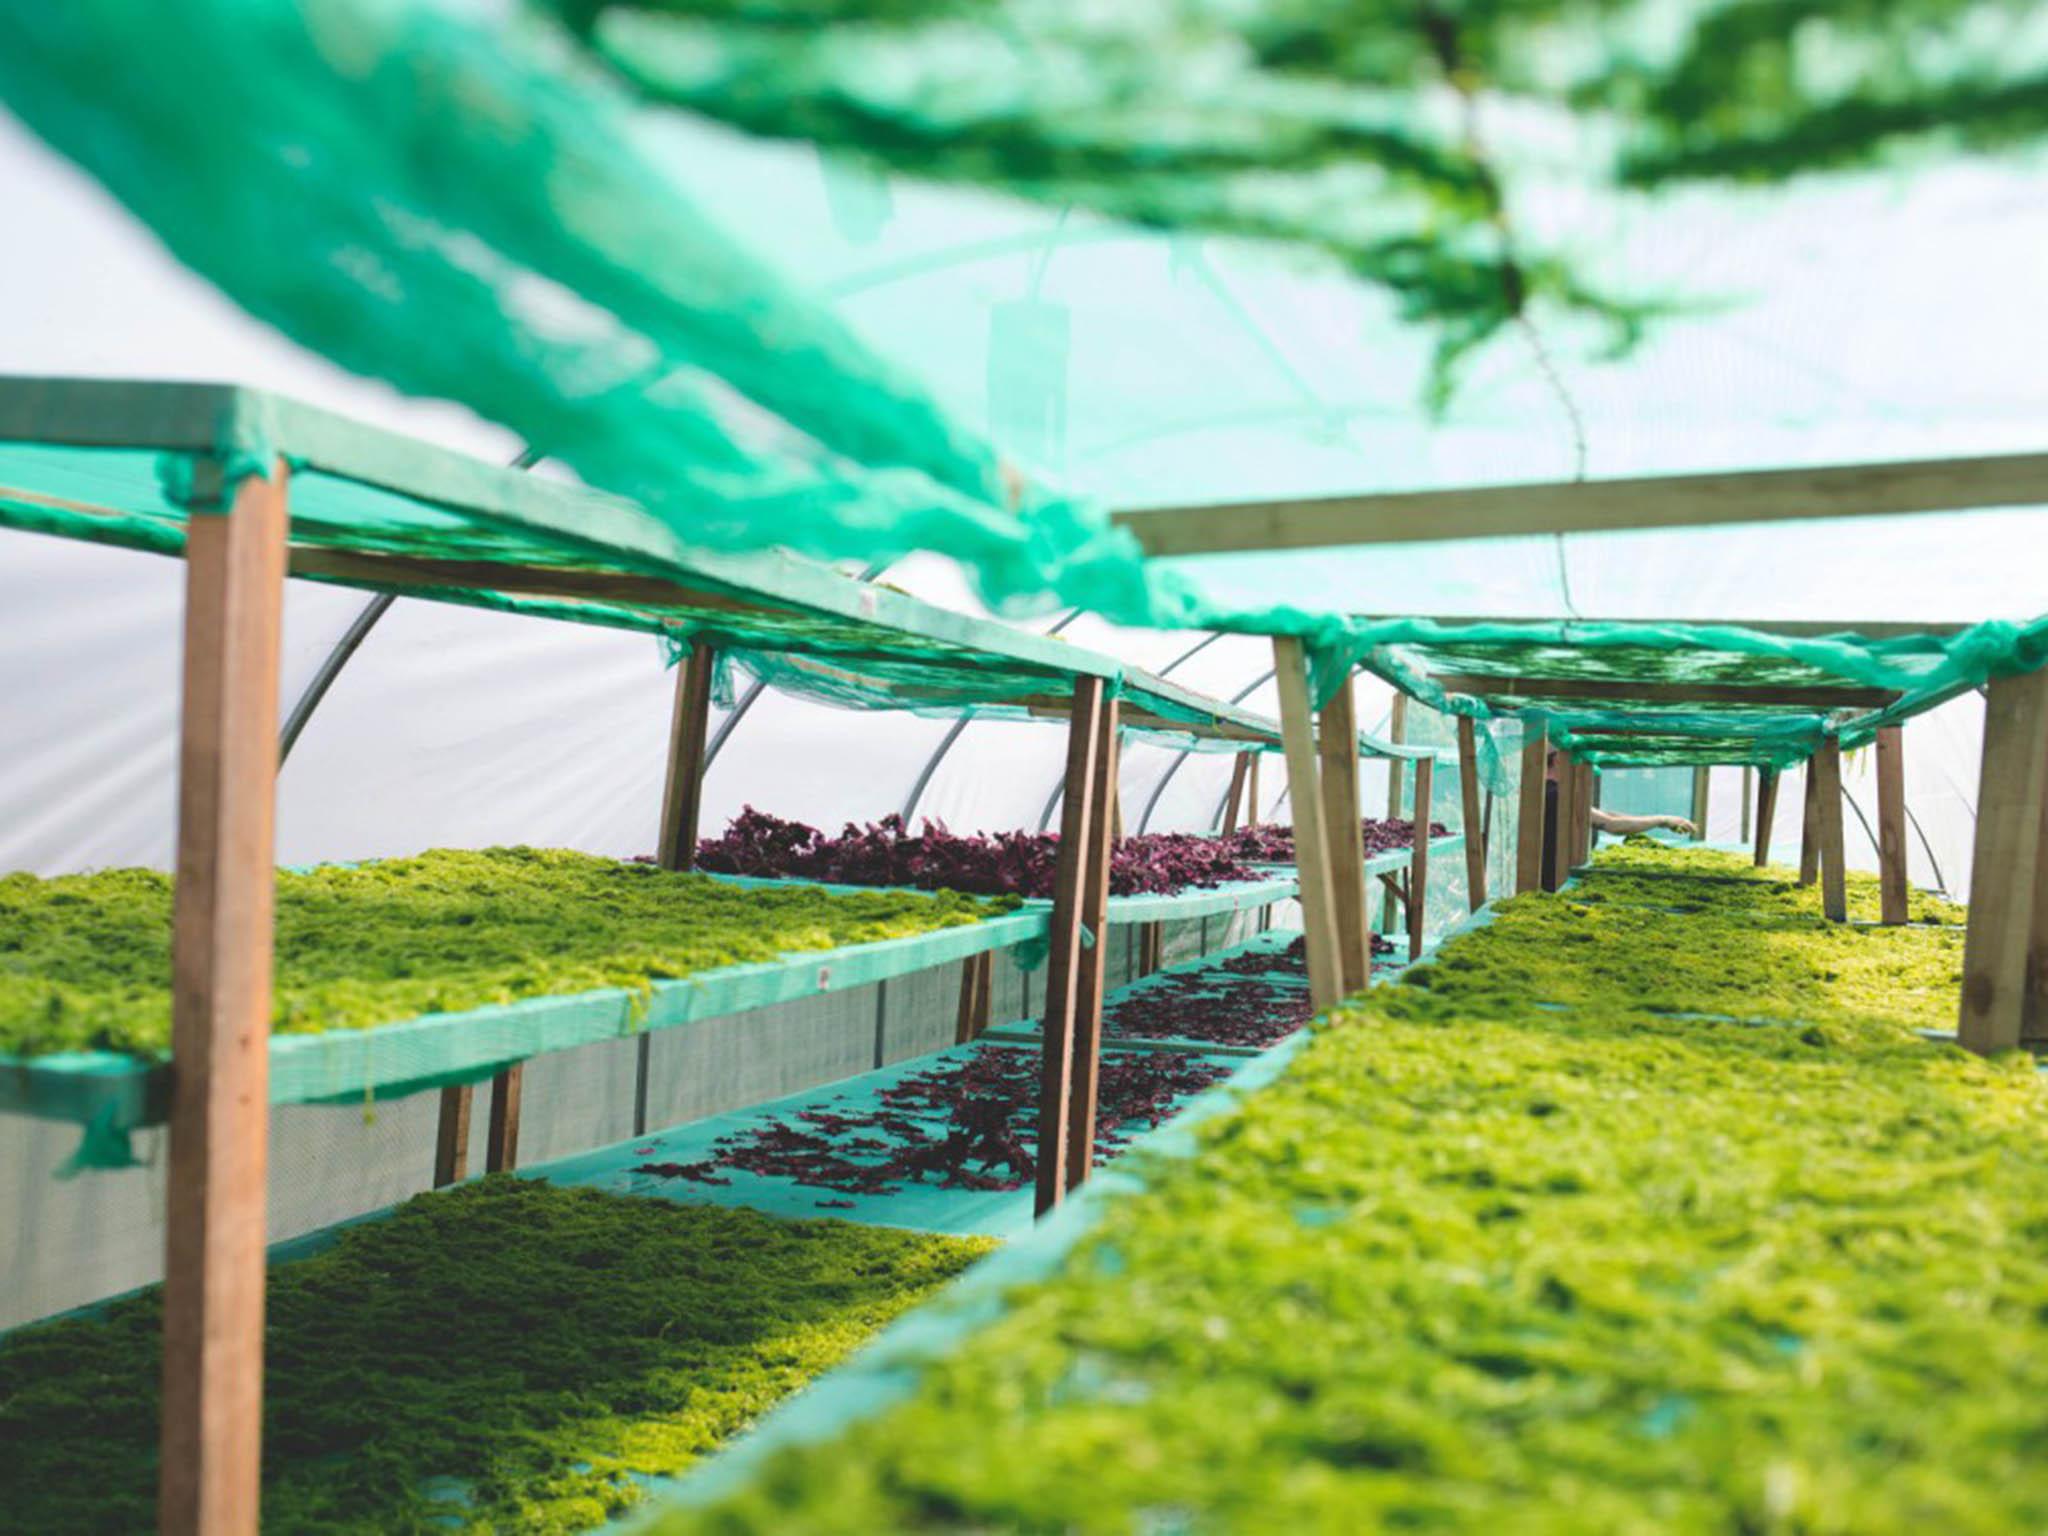 The algae is stored in greenhouses before making its way to the dinner plate